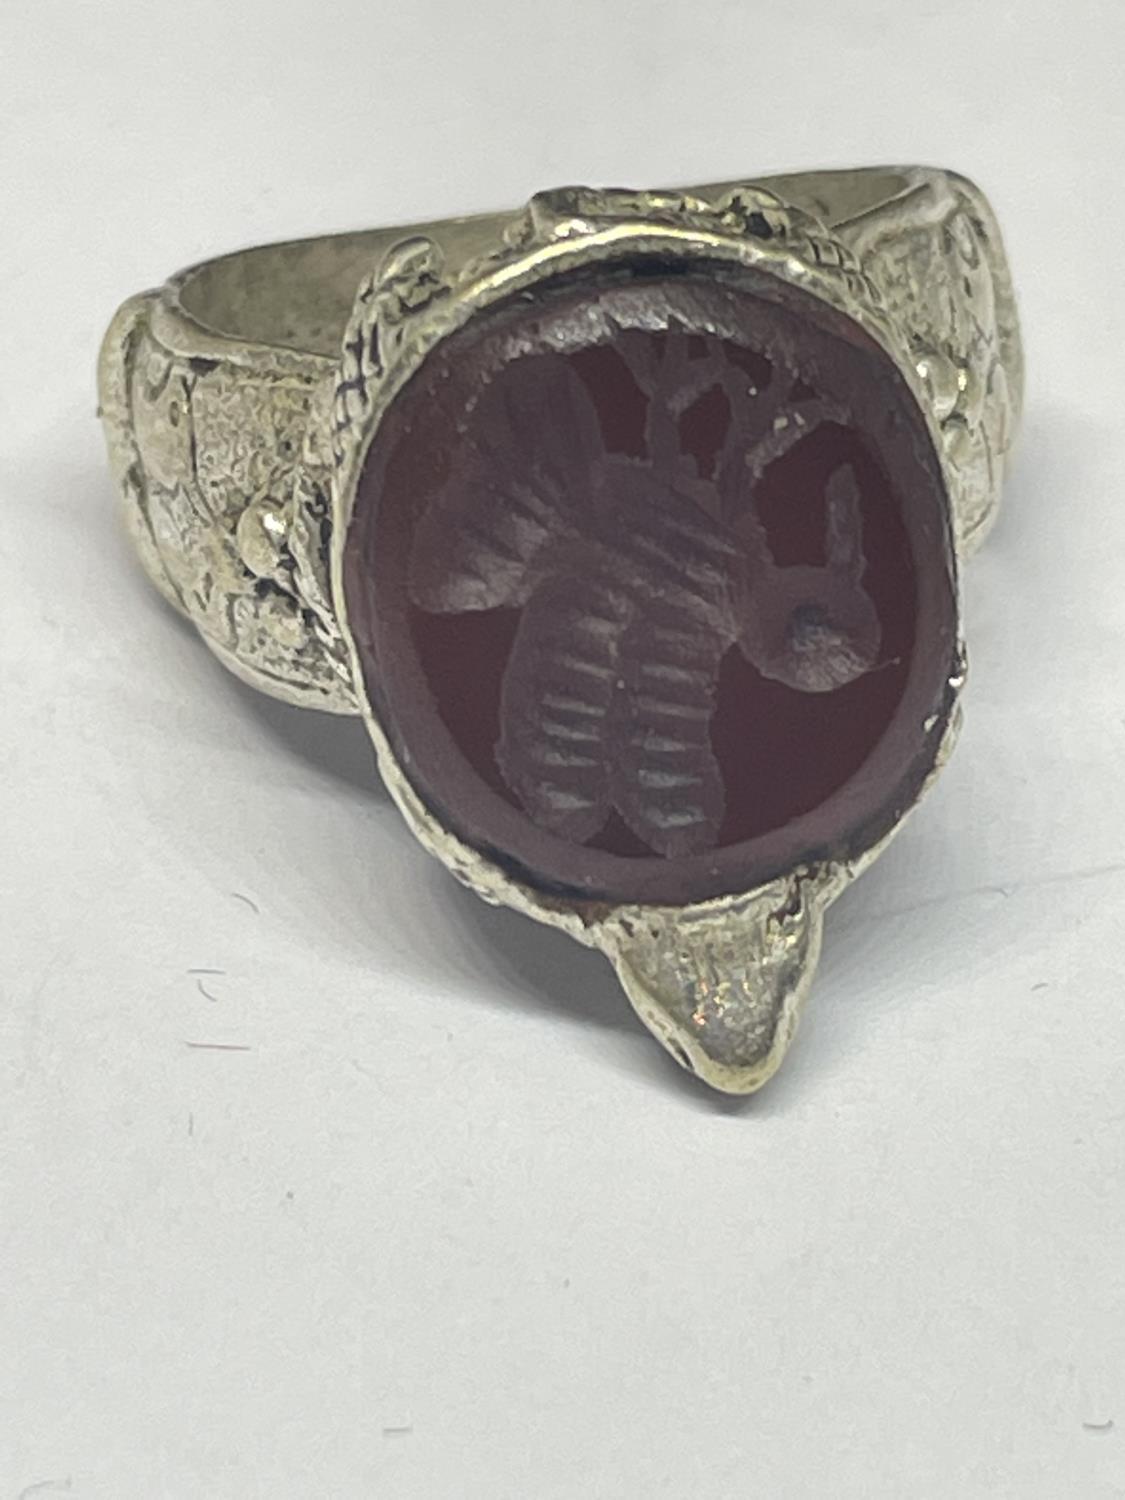 A MARKED SILVER RING WITH A TURTLE DESIGN SEAL INA PRESENTATION BOX - Image 2 of 5